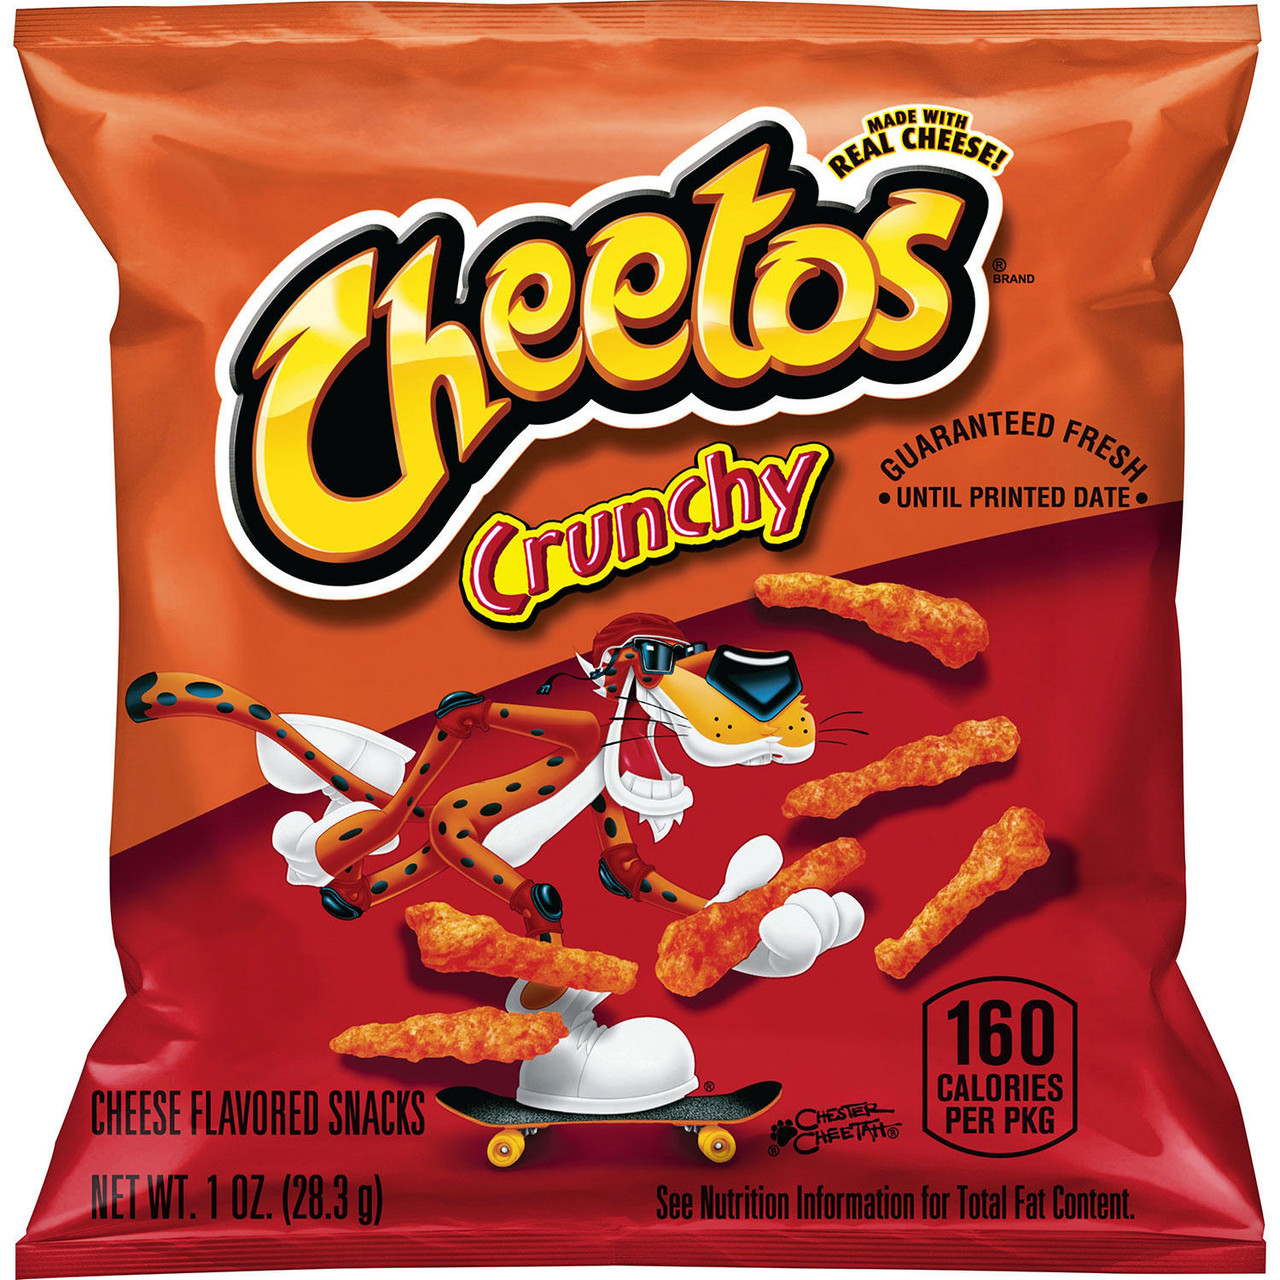 Cheetos Crunchy (1 oz., 50 ct.) - [From 103.00 - Choose pk Qty ] - *Ships from Miami